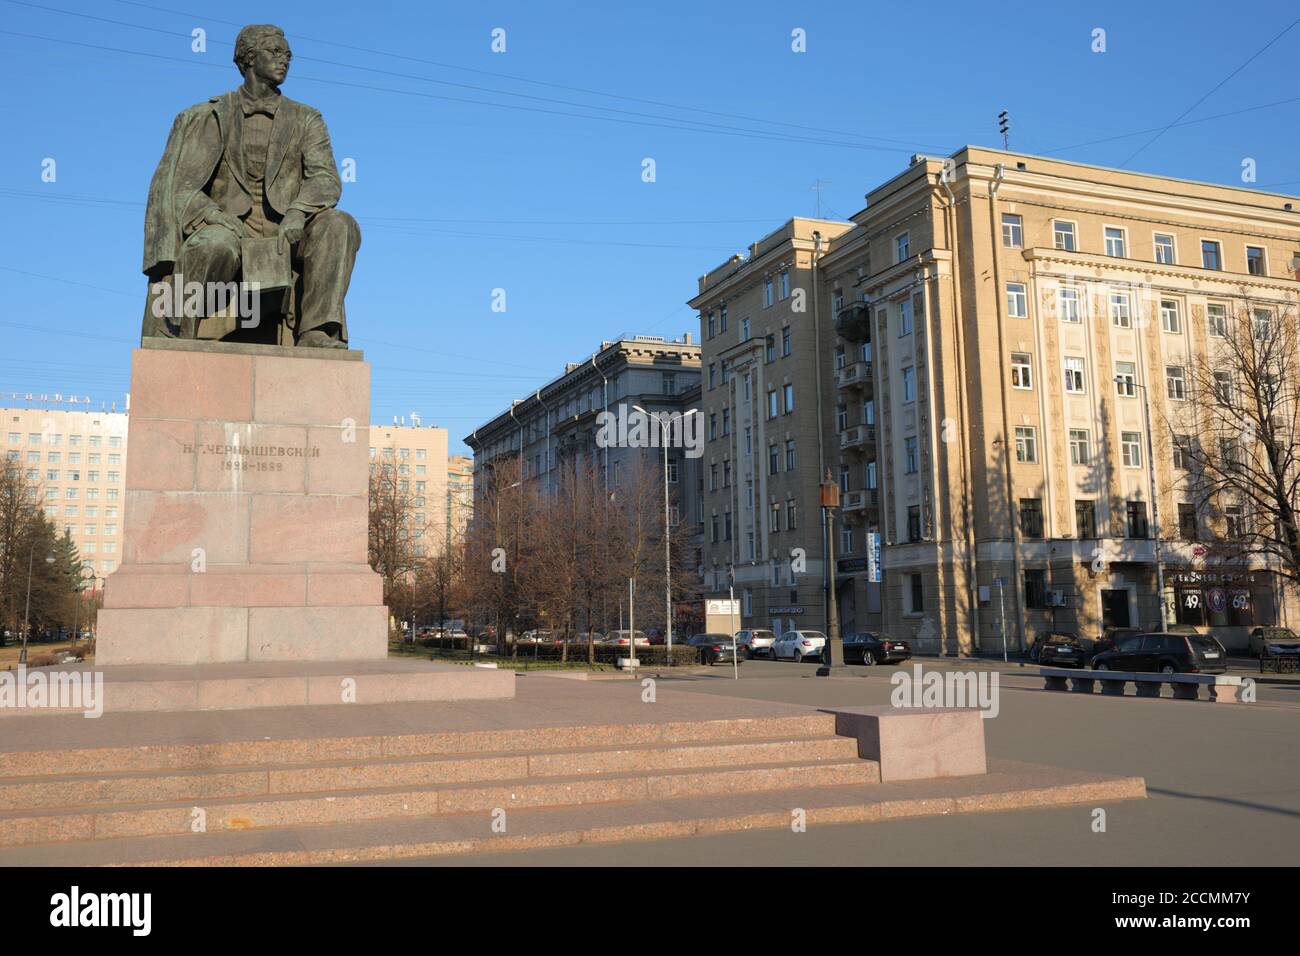 Monument to Nikolay Chernyshevsky, the Russian literary and social critic, journalist, novelist, and socialist philosopher, in St. Petersburg, Russia Stock Photo